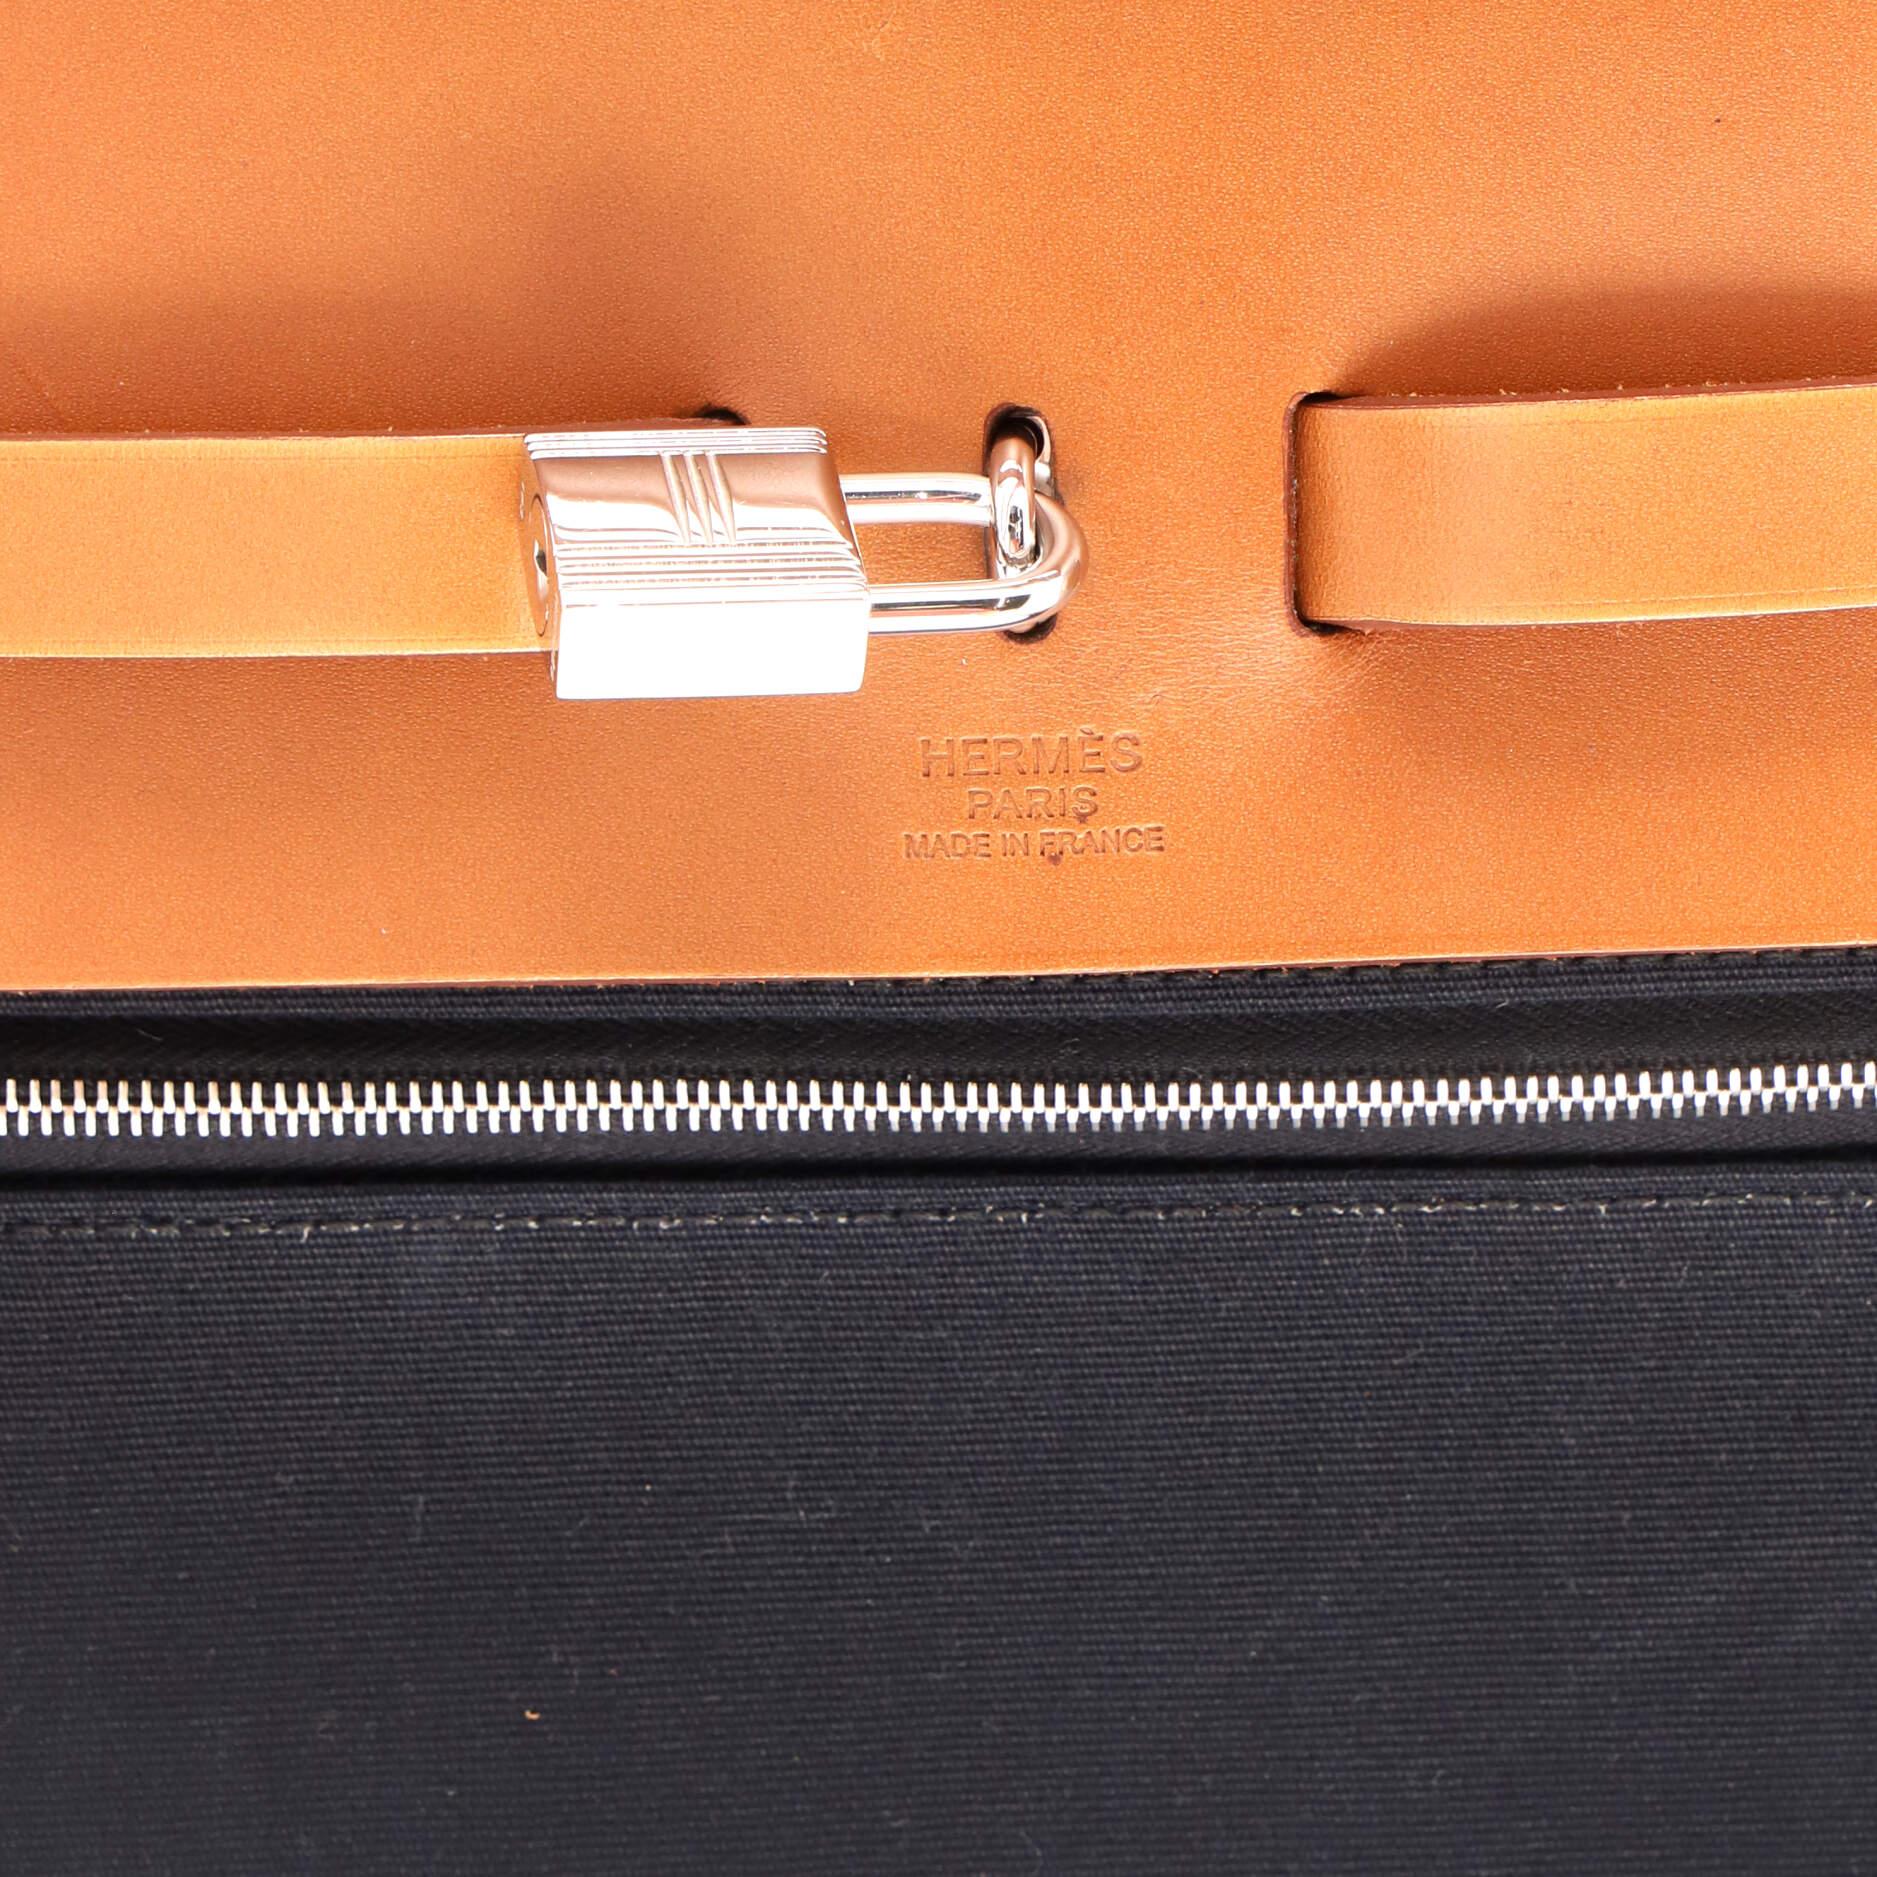 Hermes Herbag Zip Leather and Toile 39 5